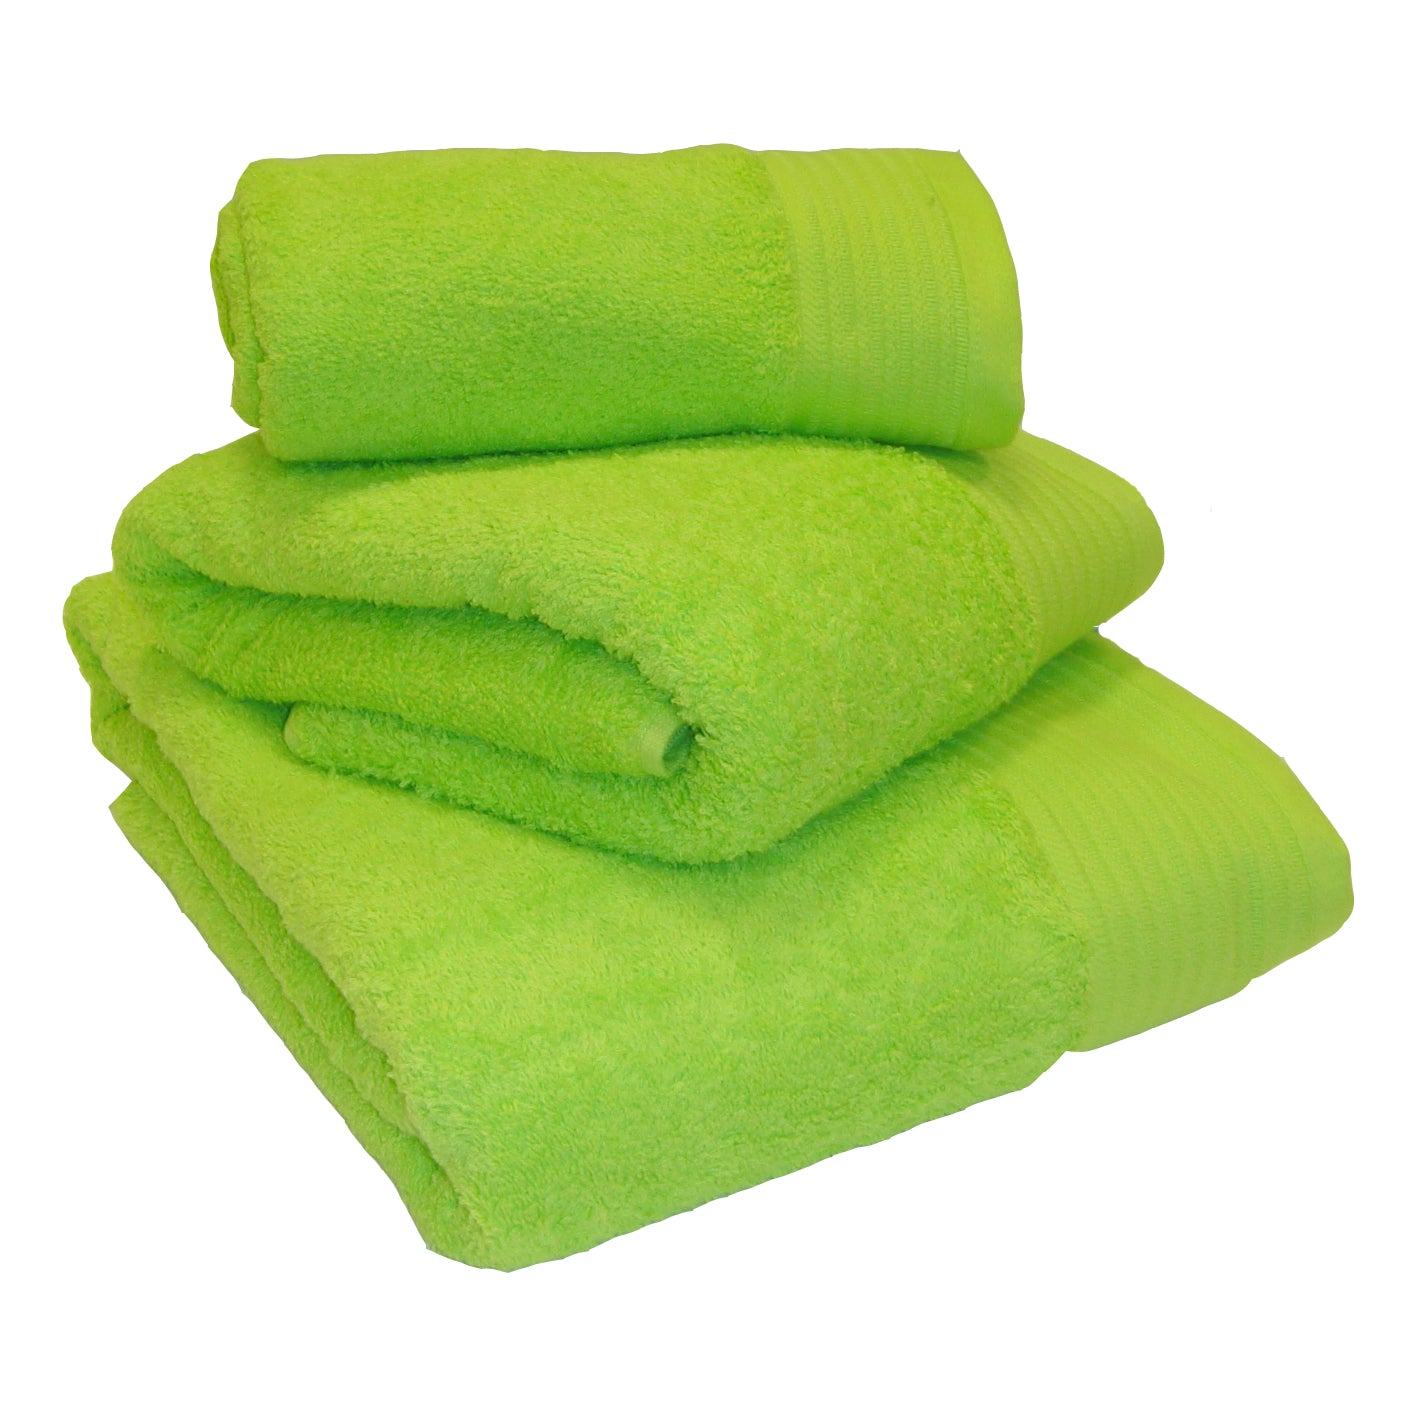 Chatsworth 100% Egyptian Cotton Bathroom Towels 600gsm Lime